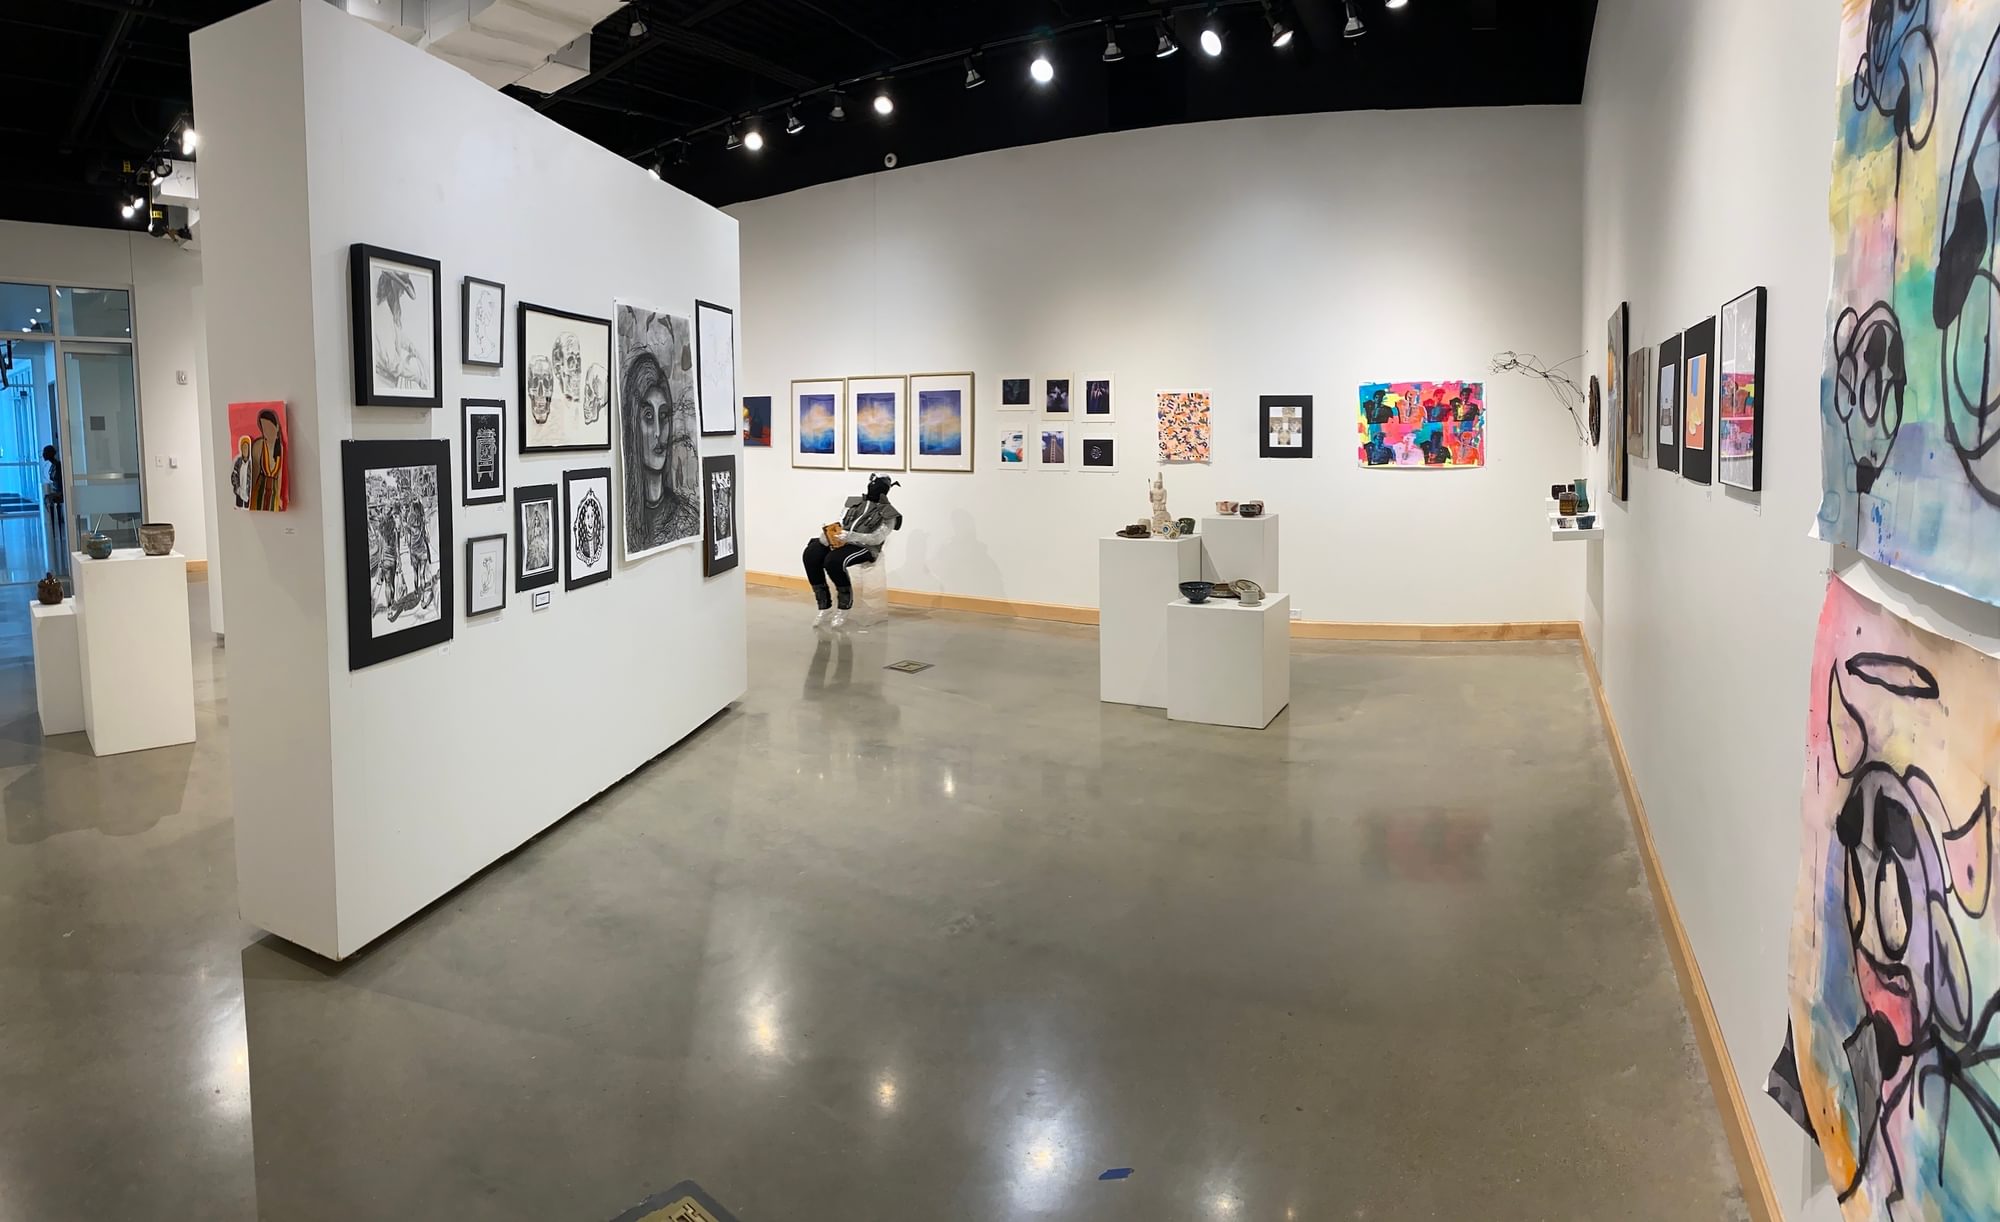 Galleries in the Baugh Center for the Visual Arts